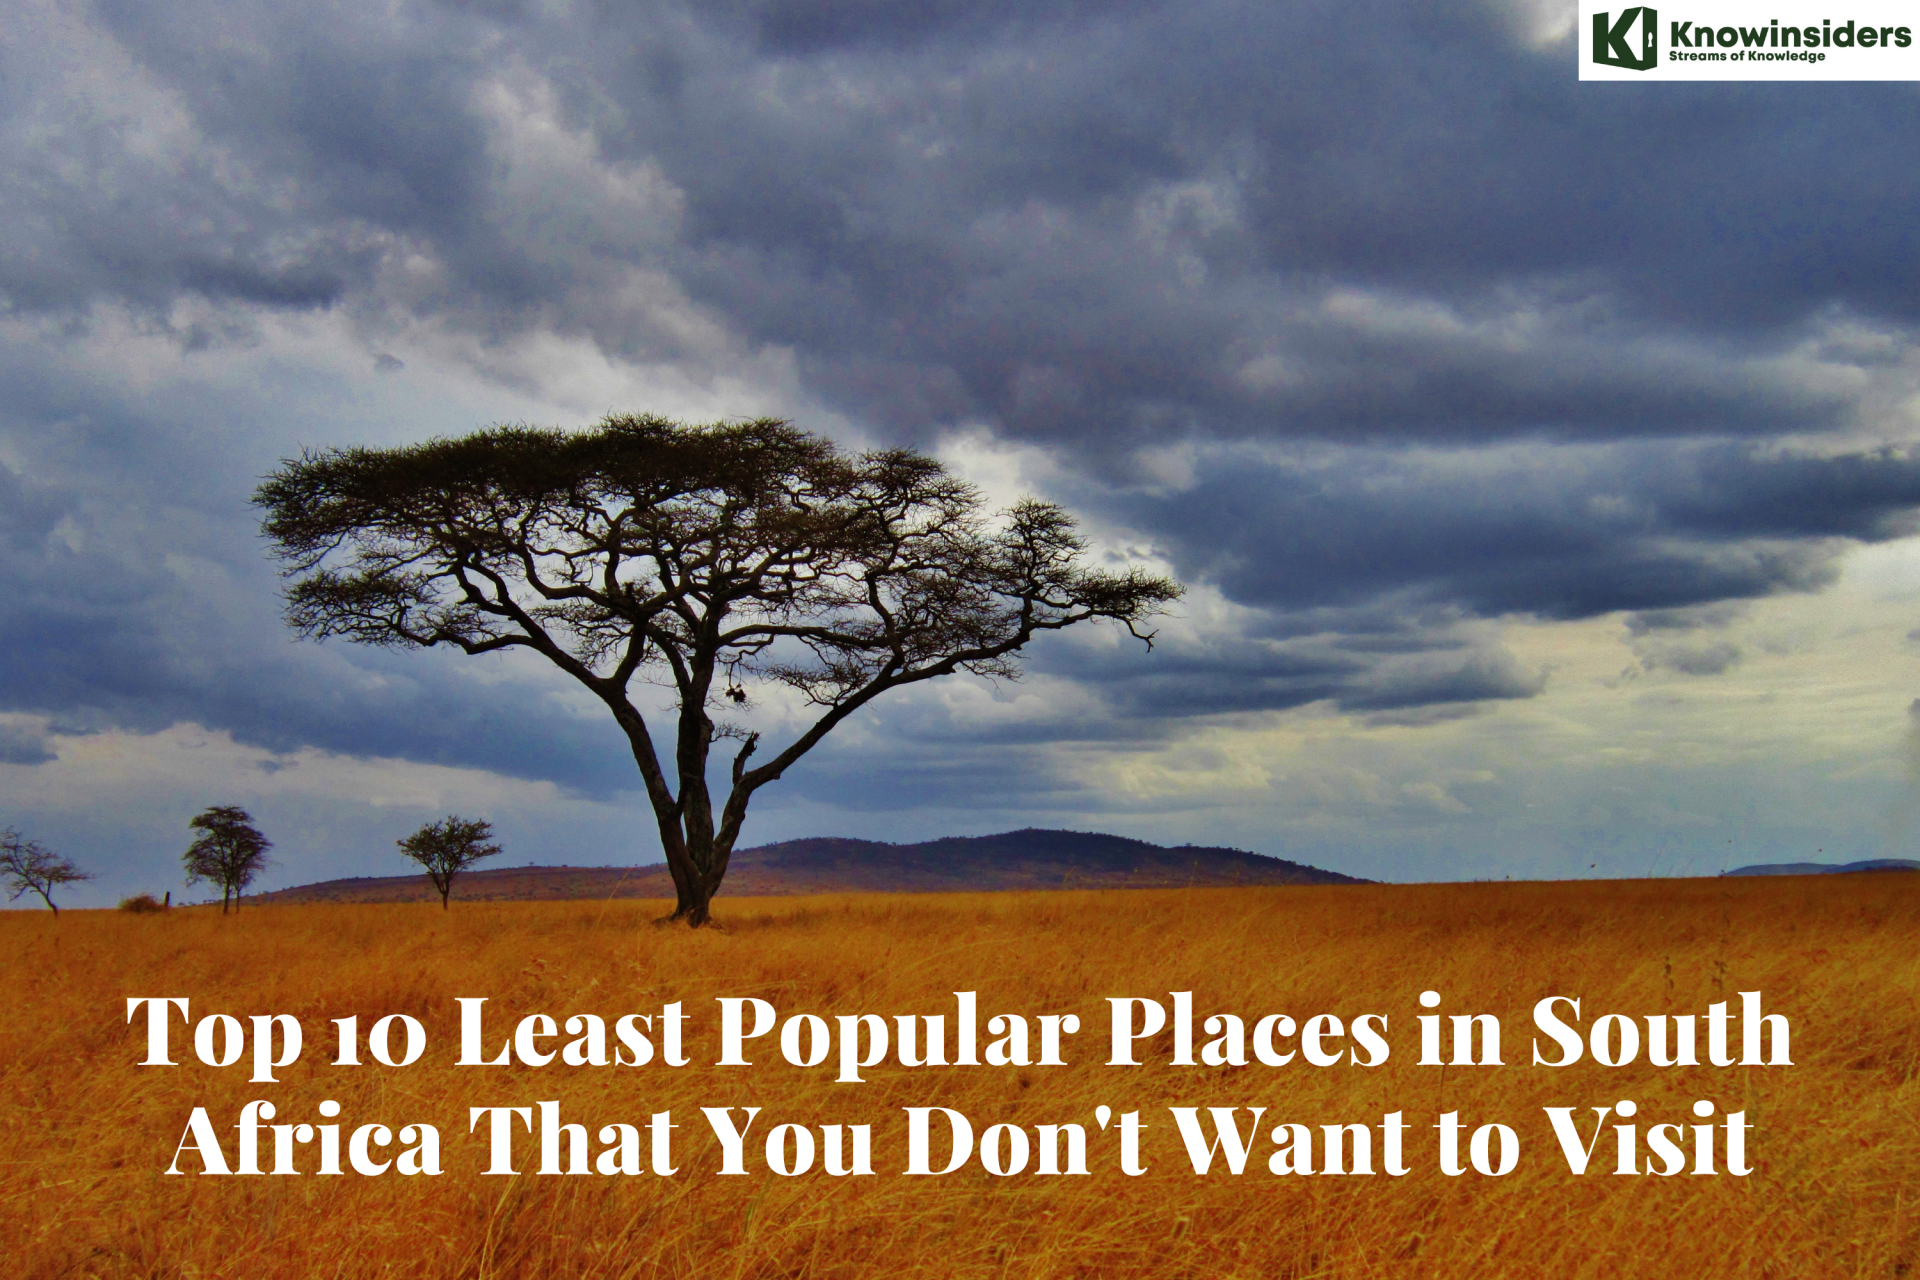 Top 10 Least Popular Places in South Africa That You Don't Want to Visit